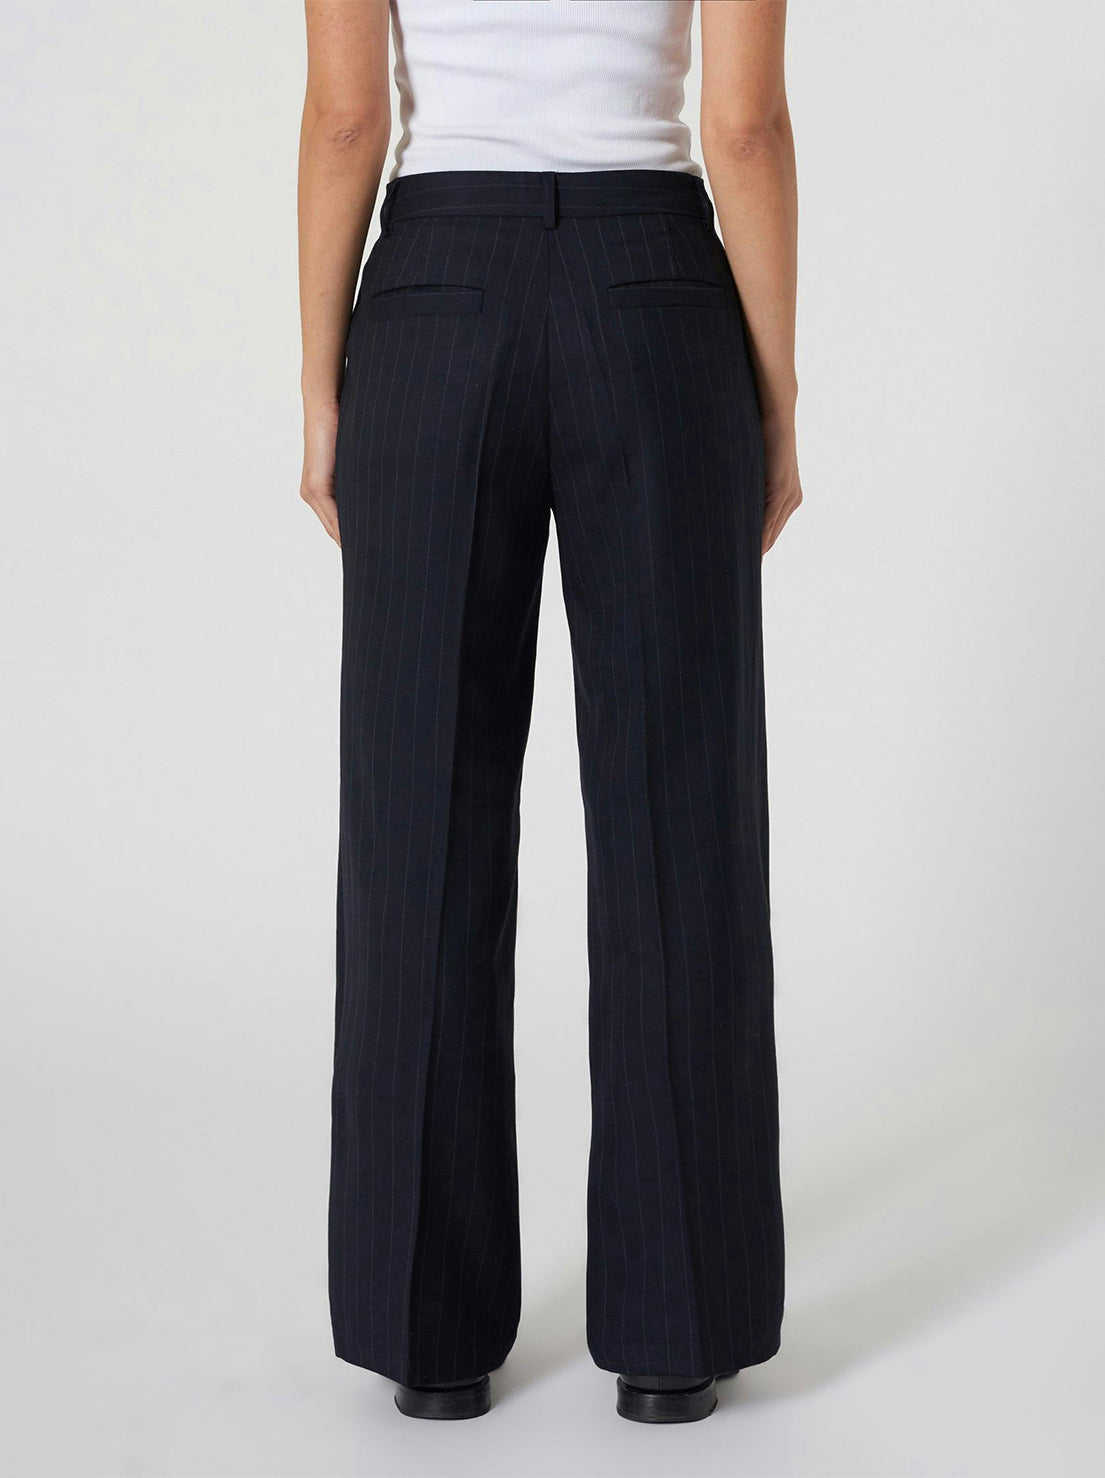 Neuw - Coco Relaxed Pinstripe Pant - Navy